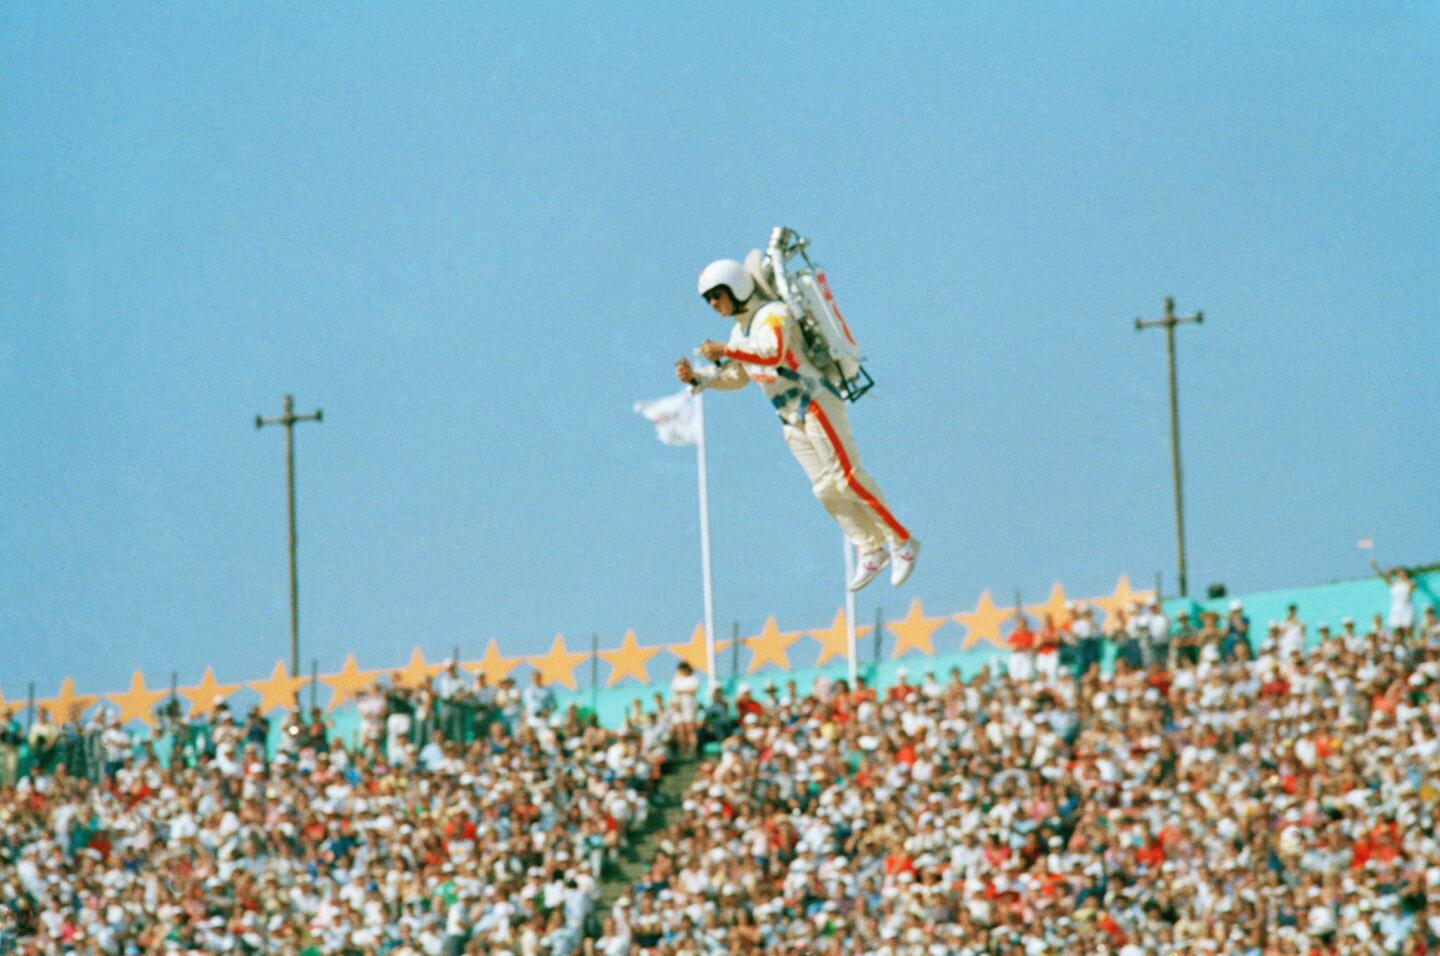 Bill Suitor, a.k.a. Rocket Man, soars with the help of a jet pack July 28, 1984, during the welcoming of nations at the opening ceremony of the 1984 Summer Olympics in the Los Angeles Memorial Coliseum.